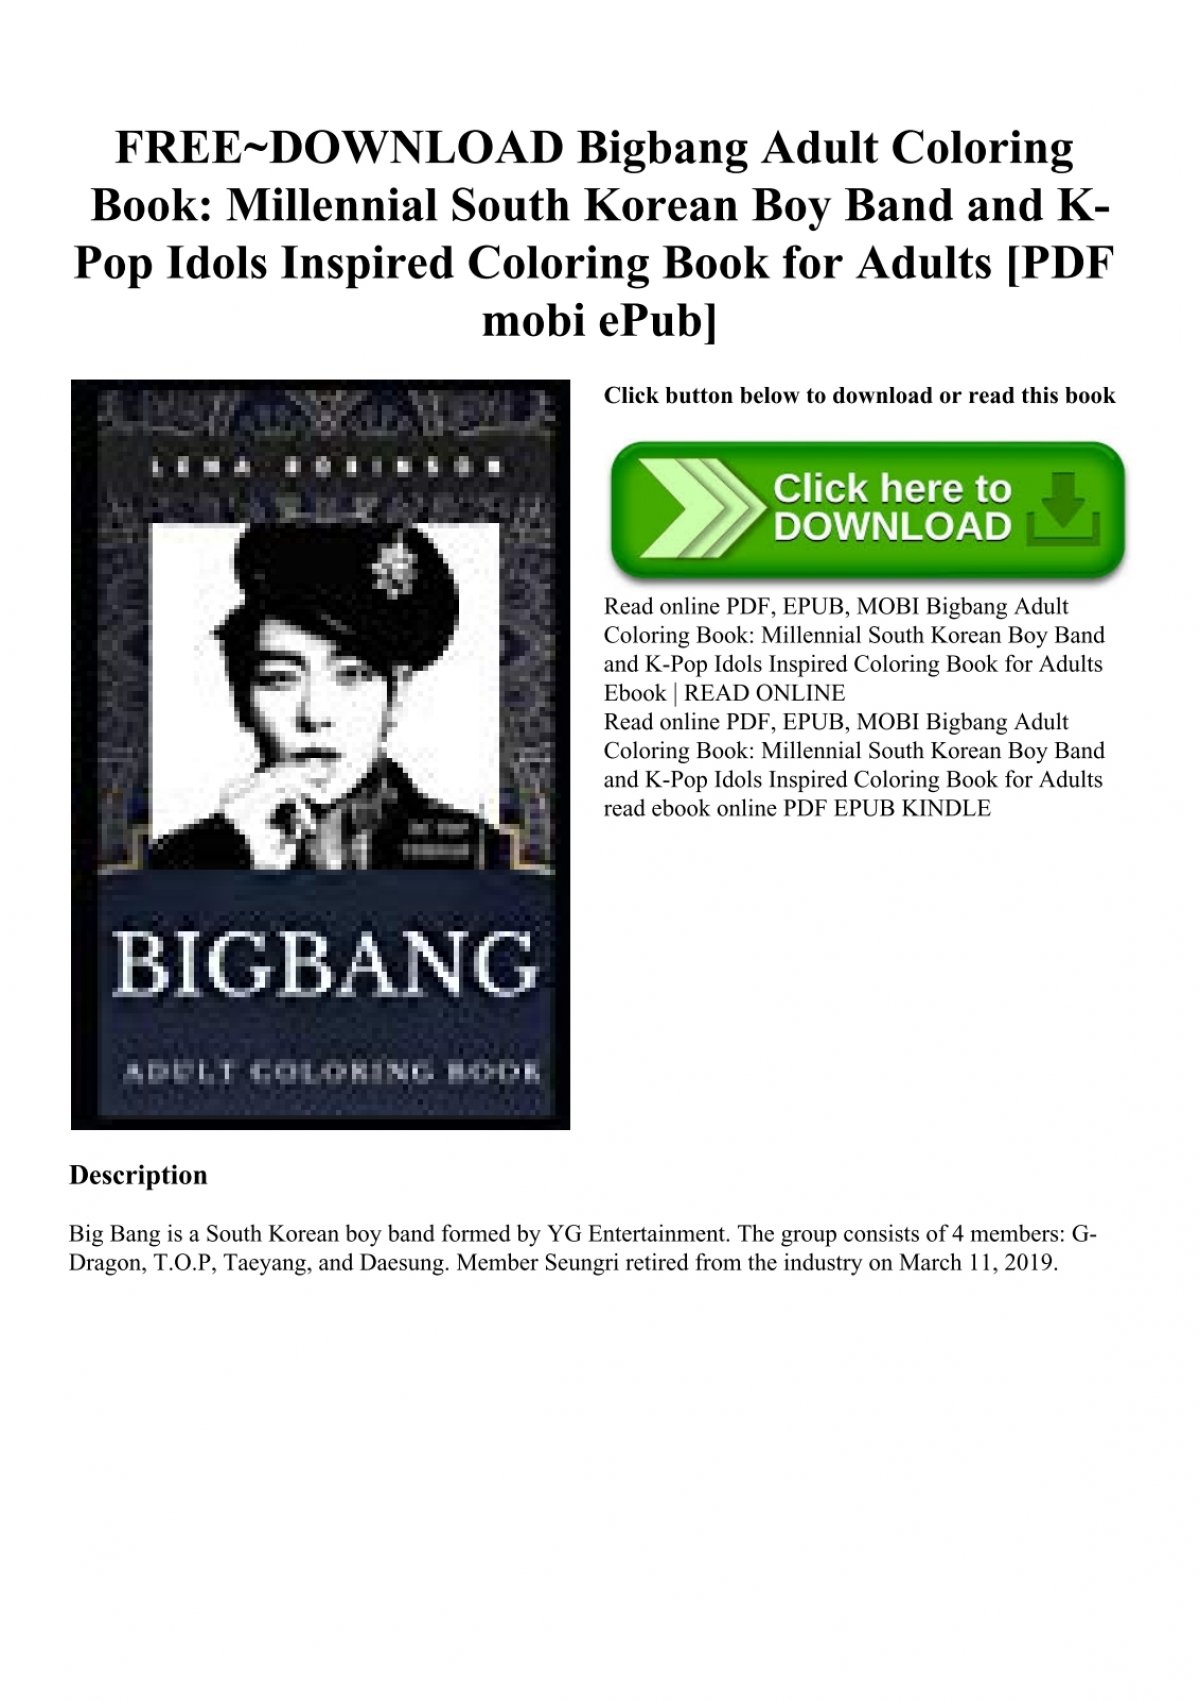 Download Free Download Bigbang Adult Coloring Book Millennial South Korean Boy Band And K Pop Idols Inspired Coloring Book For Adults Pdf Mobi Epub